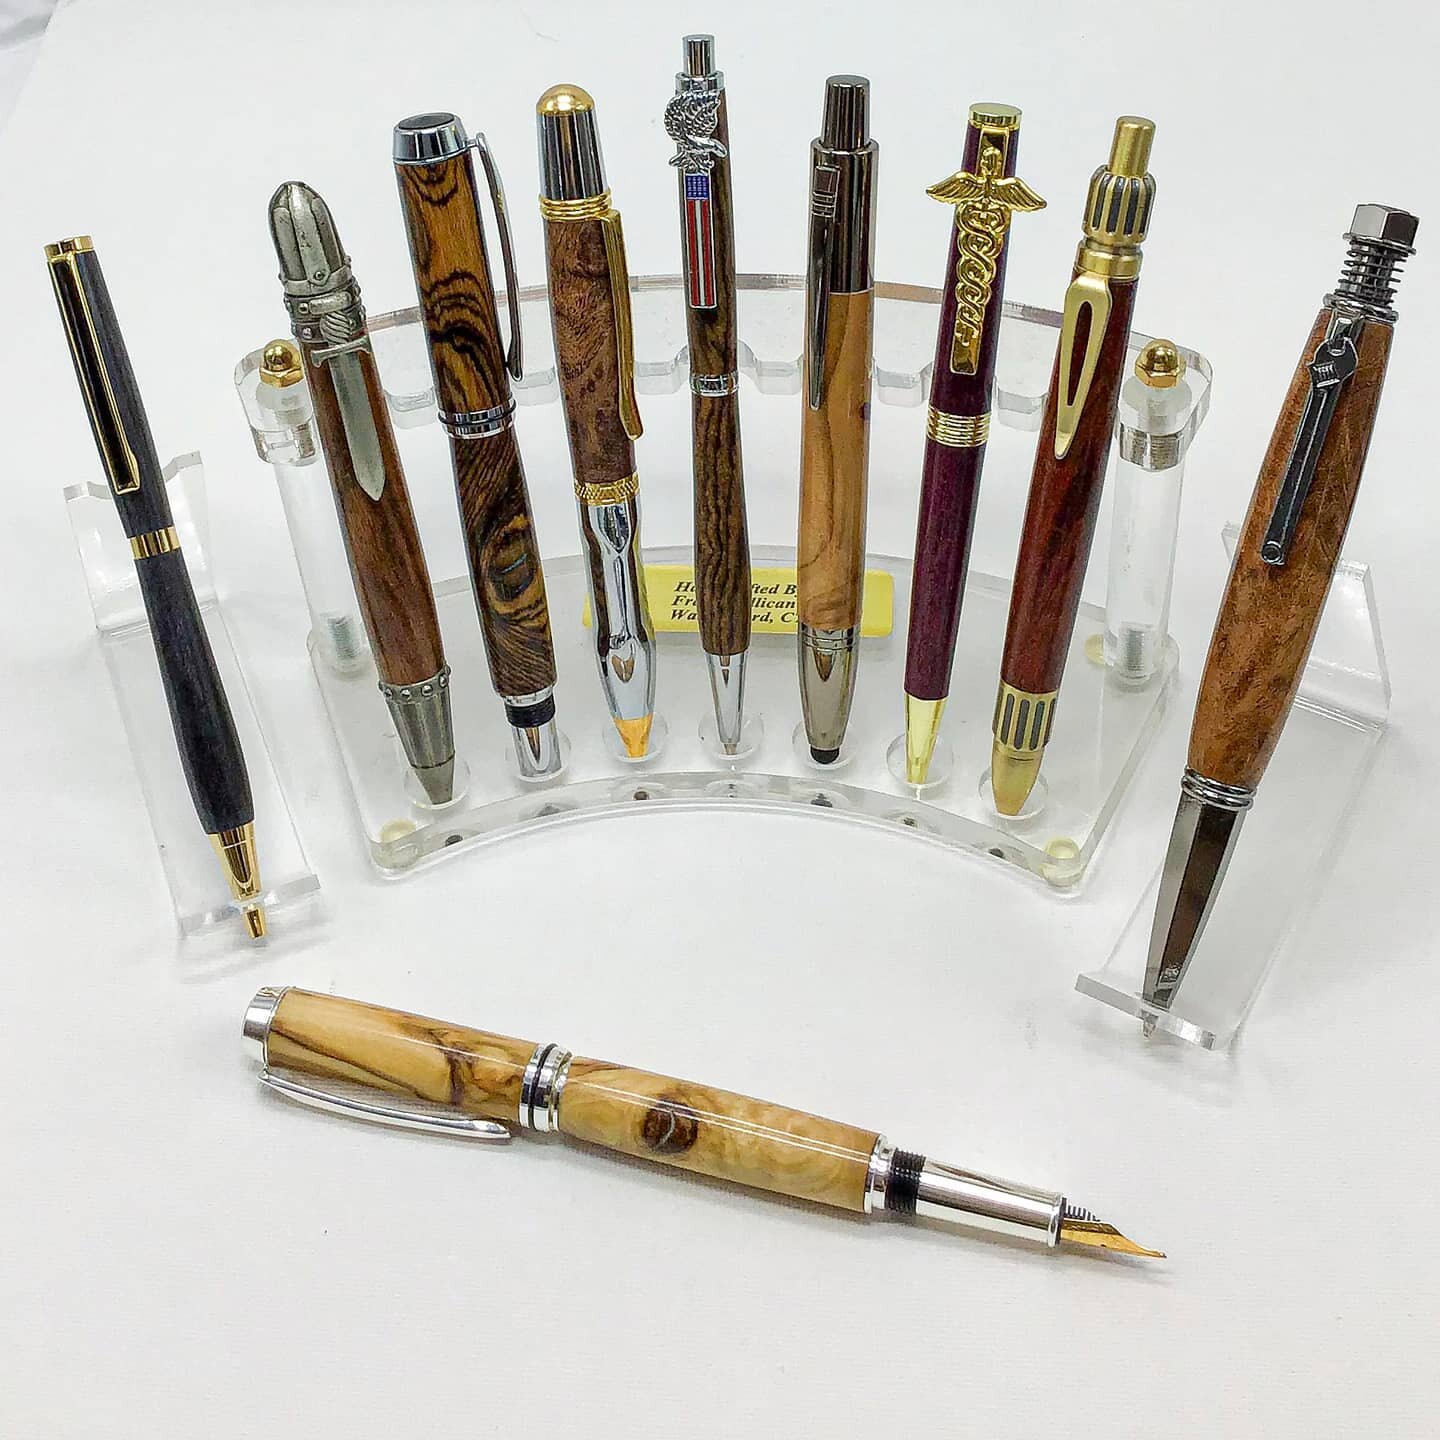 Pens make an amazing gift since they are hand made, useful, and stylish. To prepare for the holiday rush, I have completely revamped my Etsy page to make it way easier to order them! Now, you can see everything I have to offer and use the drop down m